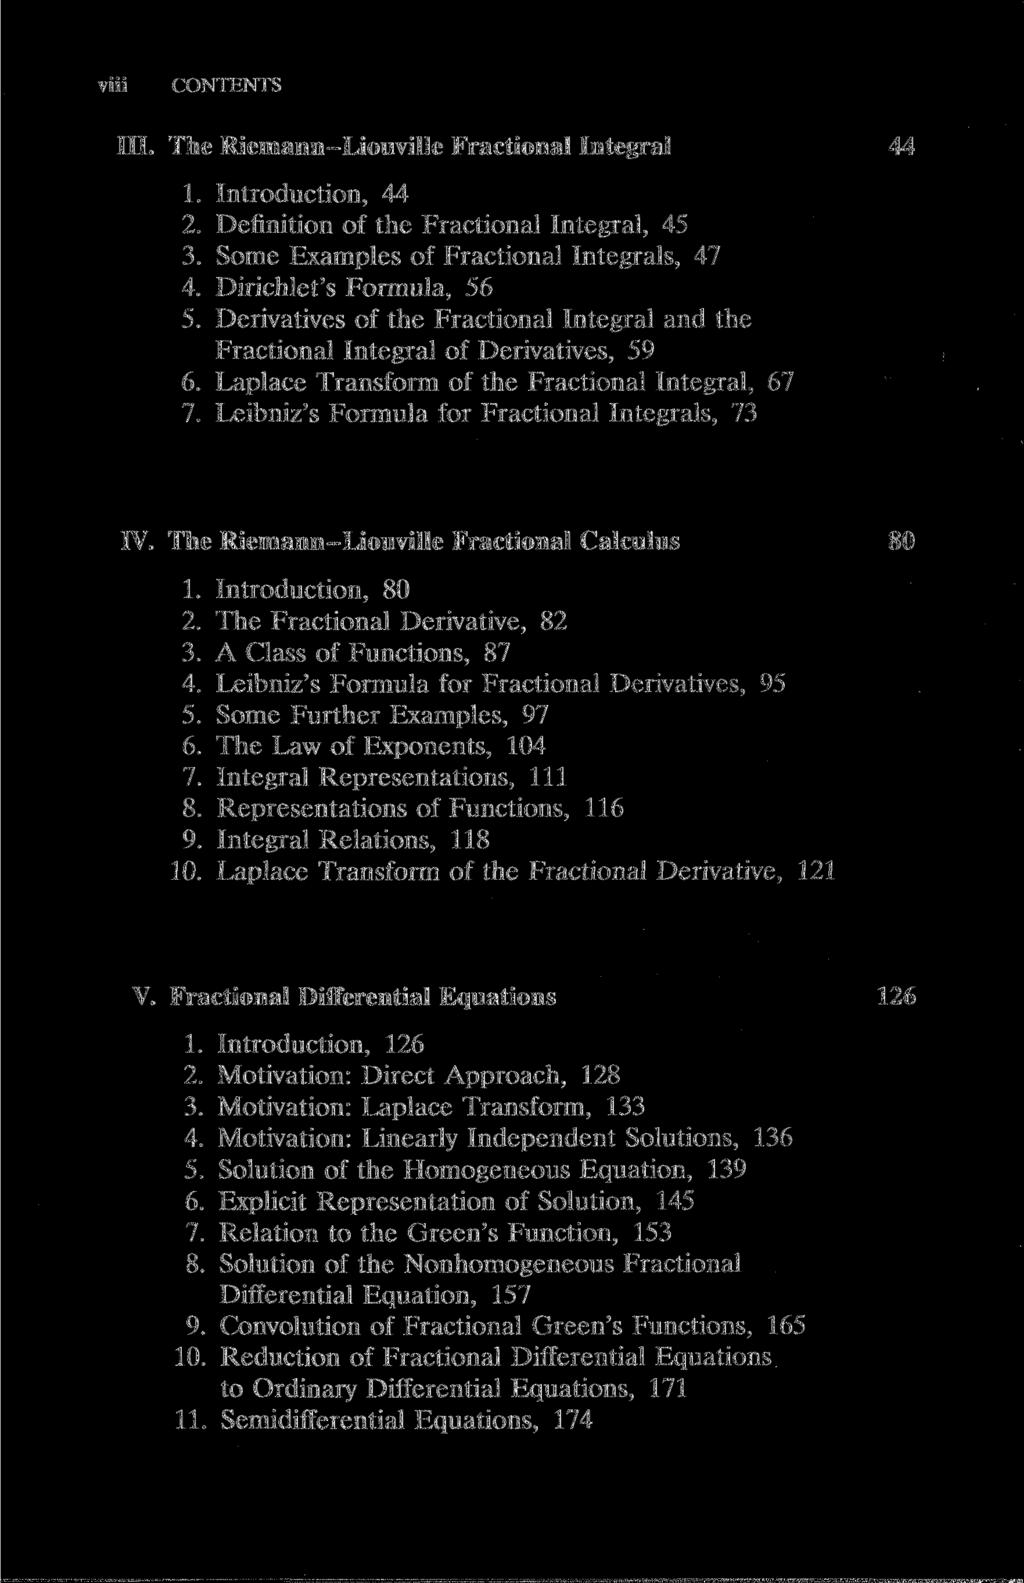 viii CONTENTS III. The Riemann-Liouville Fractional Integral 1. Introduction, 44 2. Definition of the Fractional Integral, 45 3. Some Examples of Fractional Integrals, 47 4. Dirichlet's Formula, 56 5.